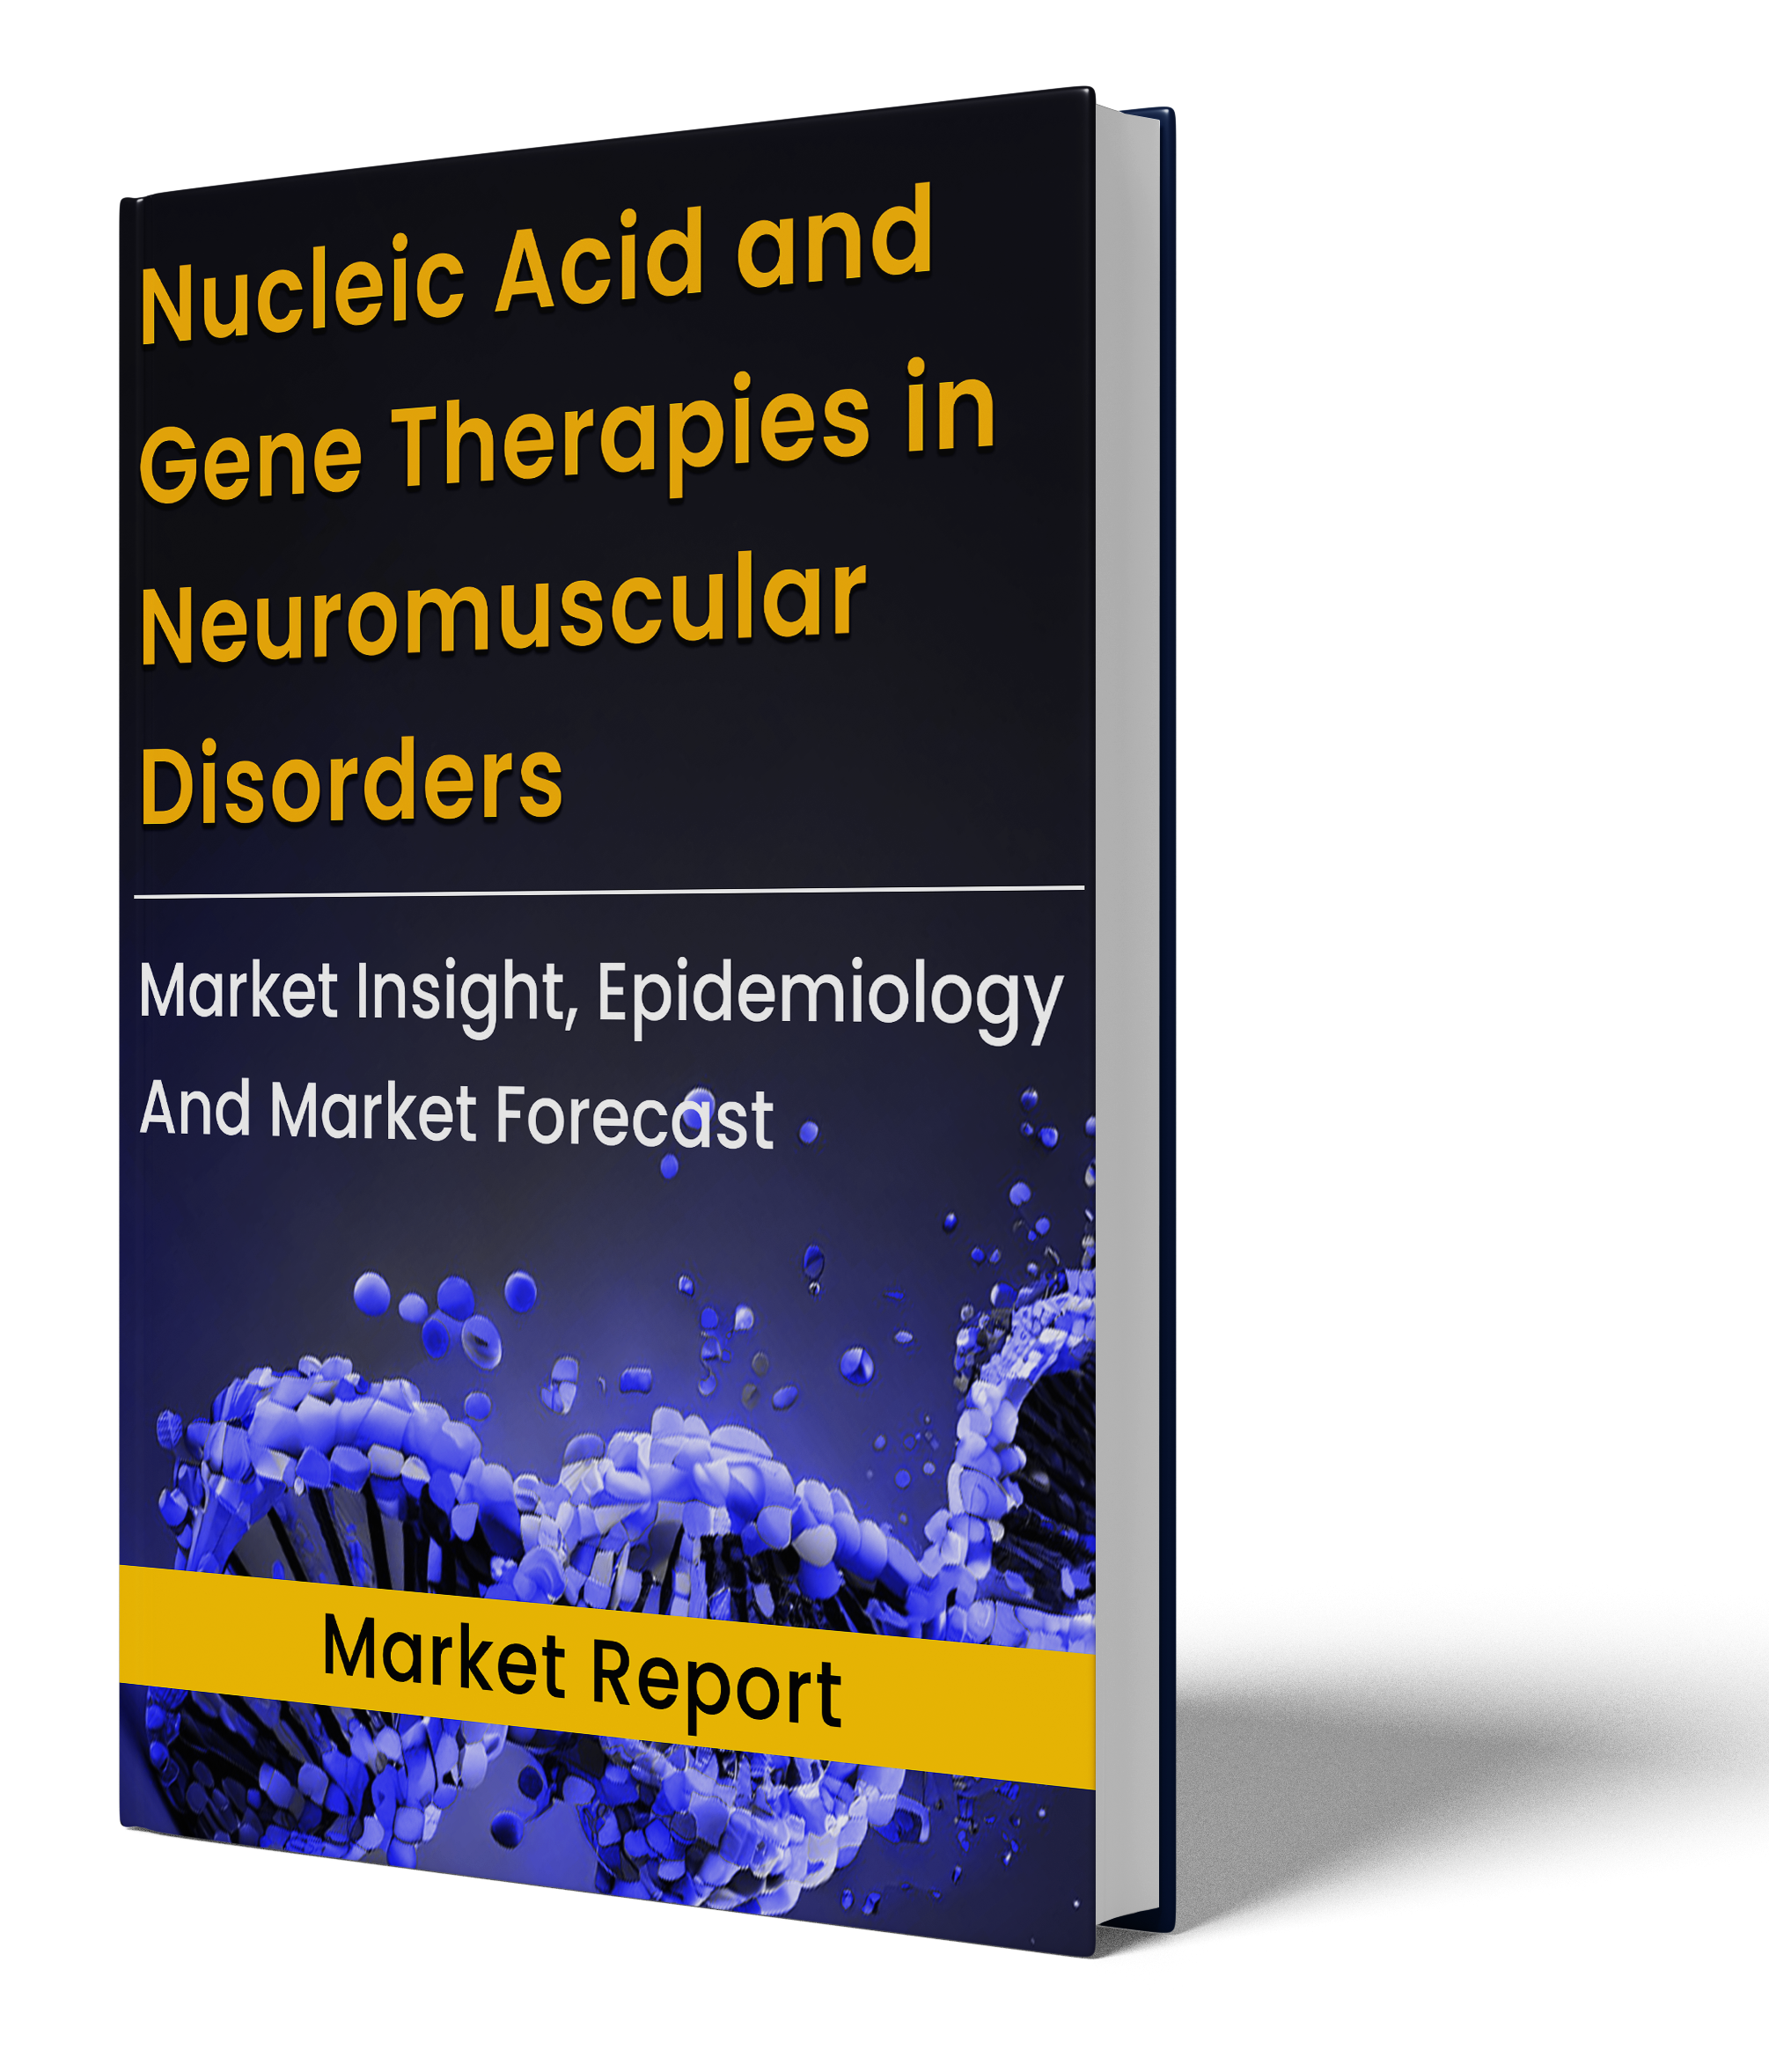 Nucleic Acid and Gene Therapies in Neuromuscular Disorders Market Report